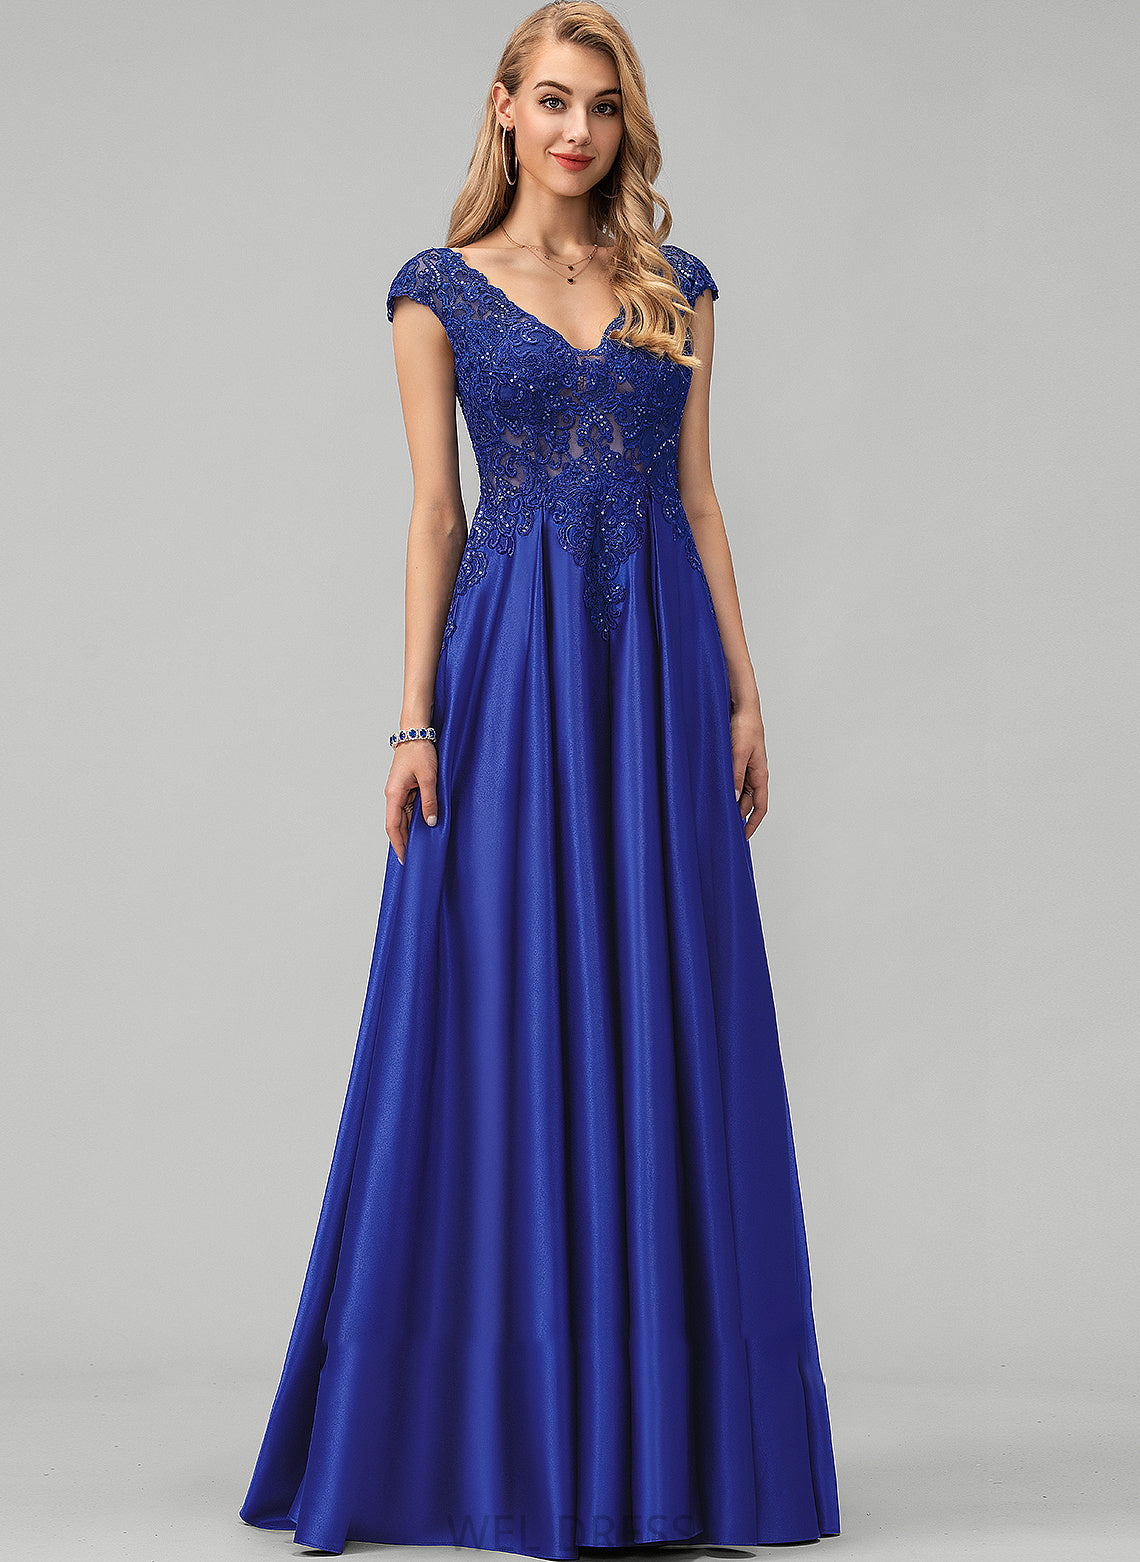 Satin Alula V-neck Ball-Gown/Princess Lace Prom Dresses Floor-Length With Sequins